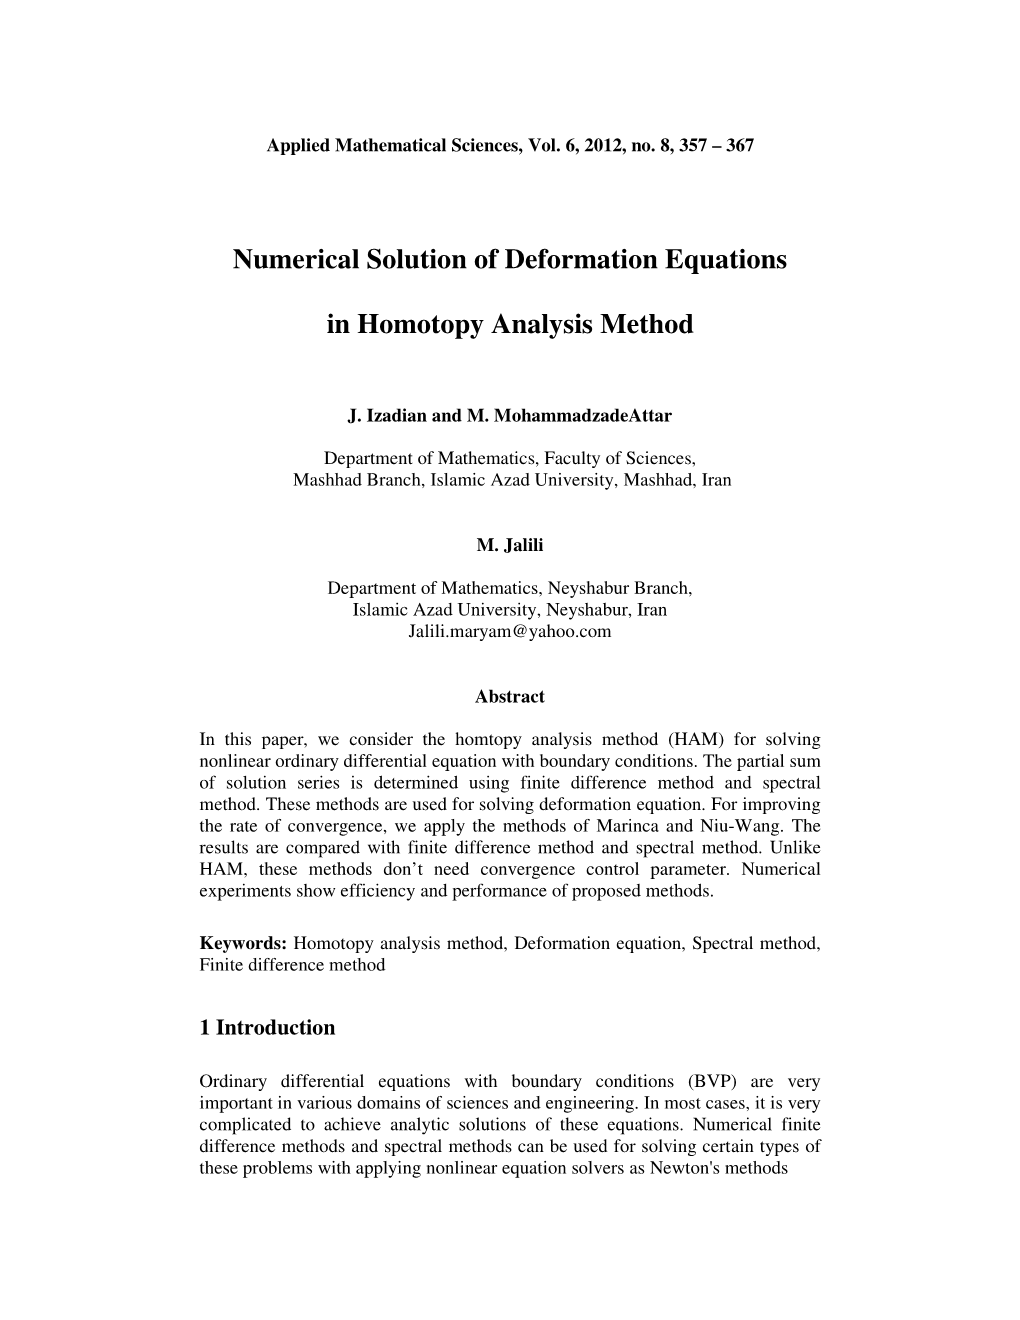 Numerical Solution of Deformation Equations in Homotopy Analysis